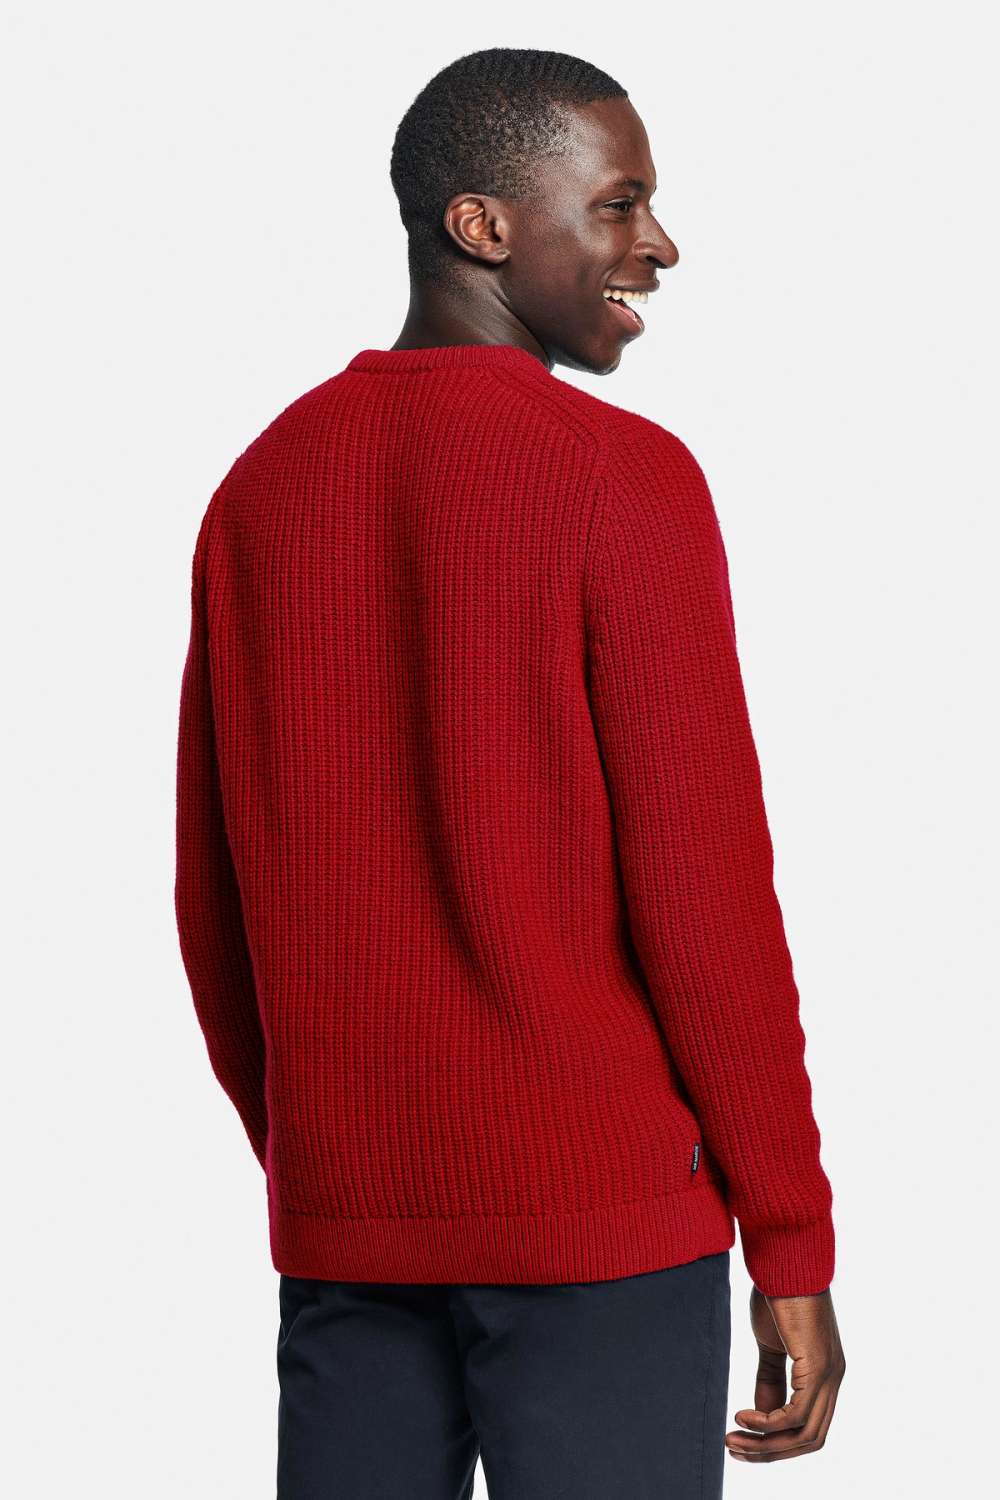 Chillies * The Knit Pullover